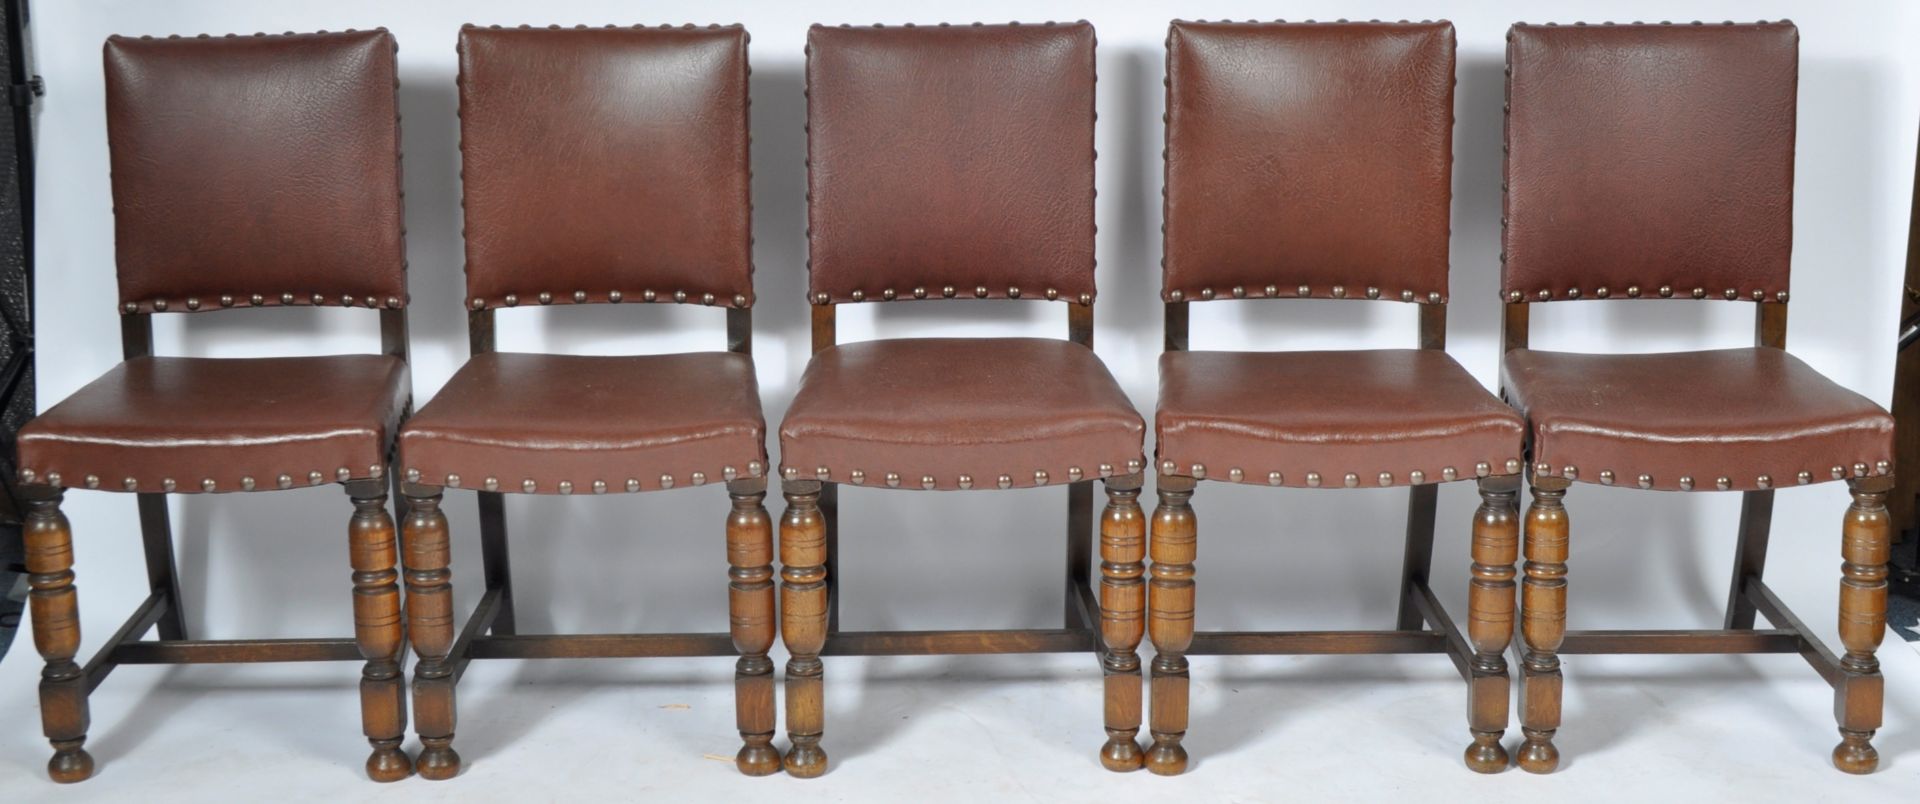 MATCHING SET OF TEN OAK AND LEATHERETTE DINING CHAIRS - Image 3 of 11